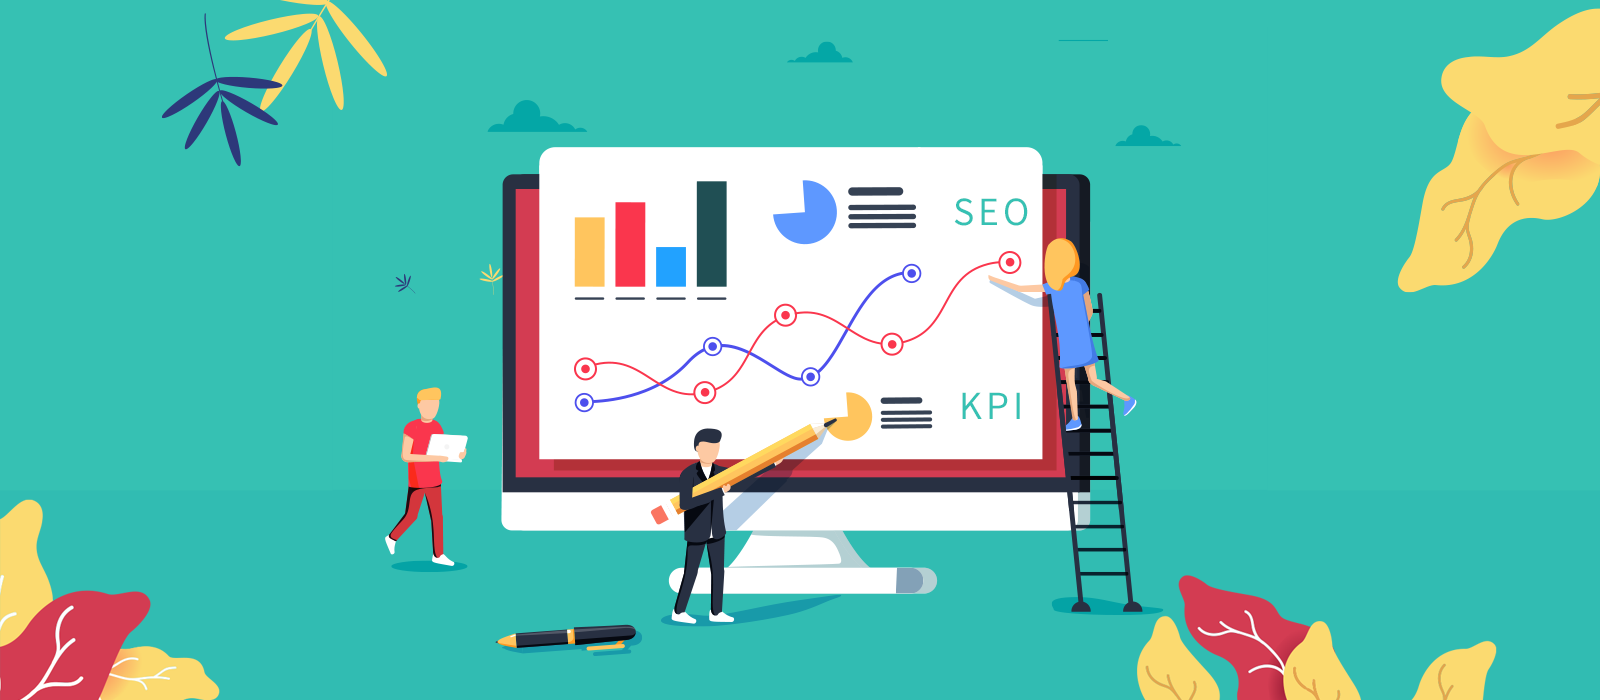 The-Most-Important-SEO-KPIs-to-Track-and-Report-On